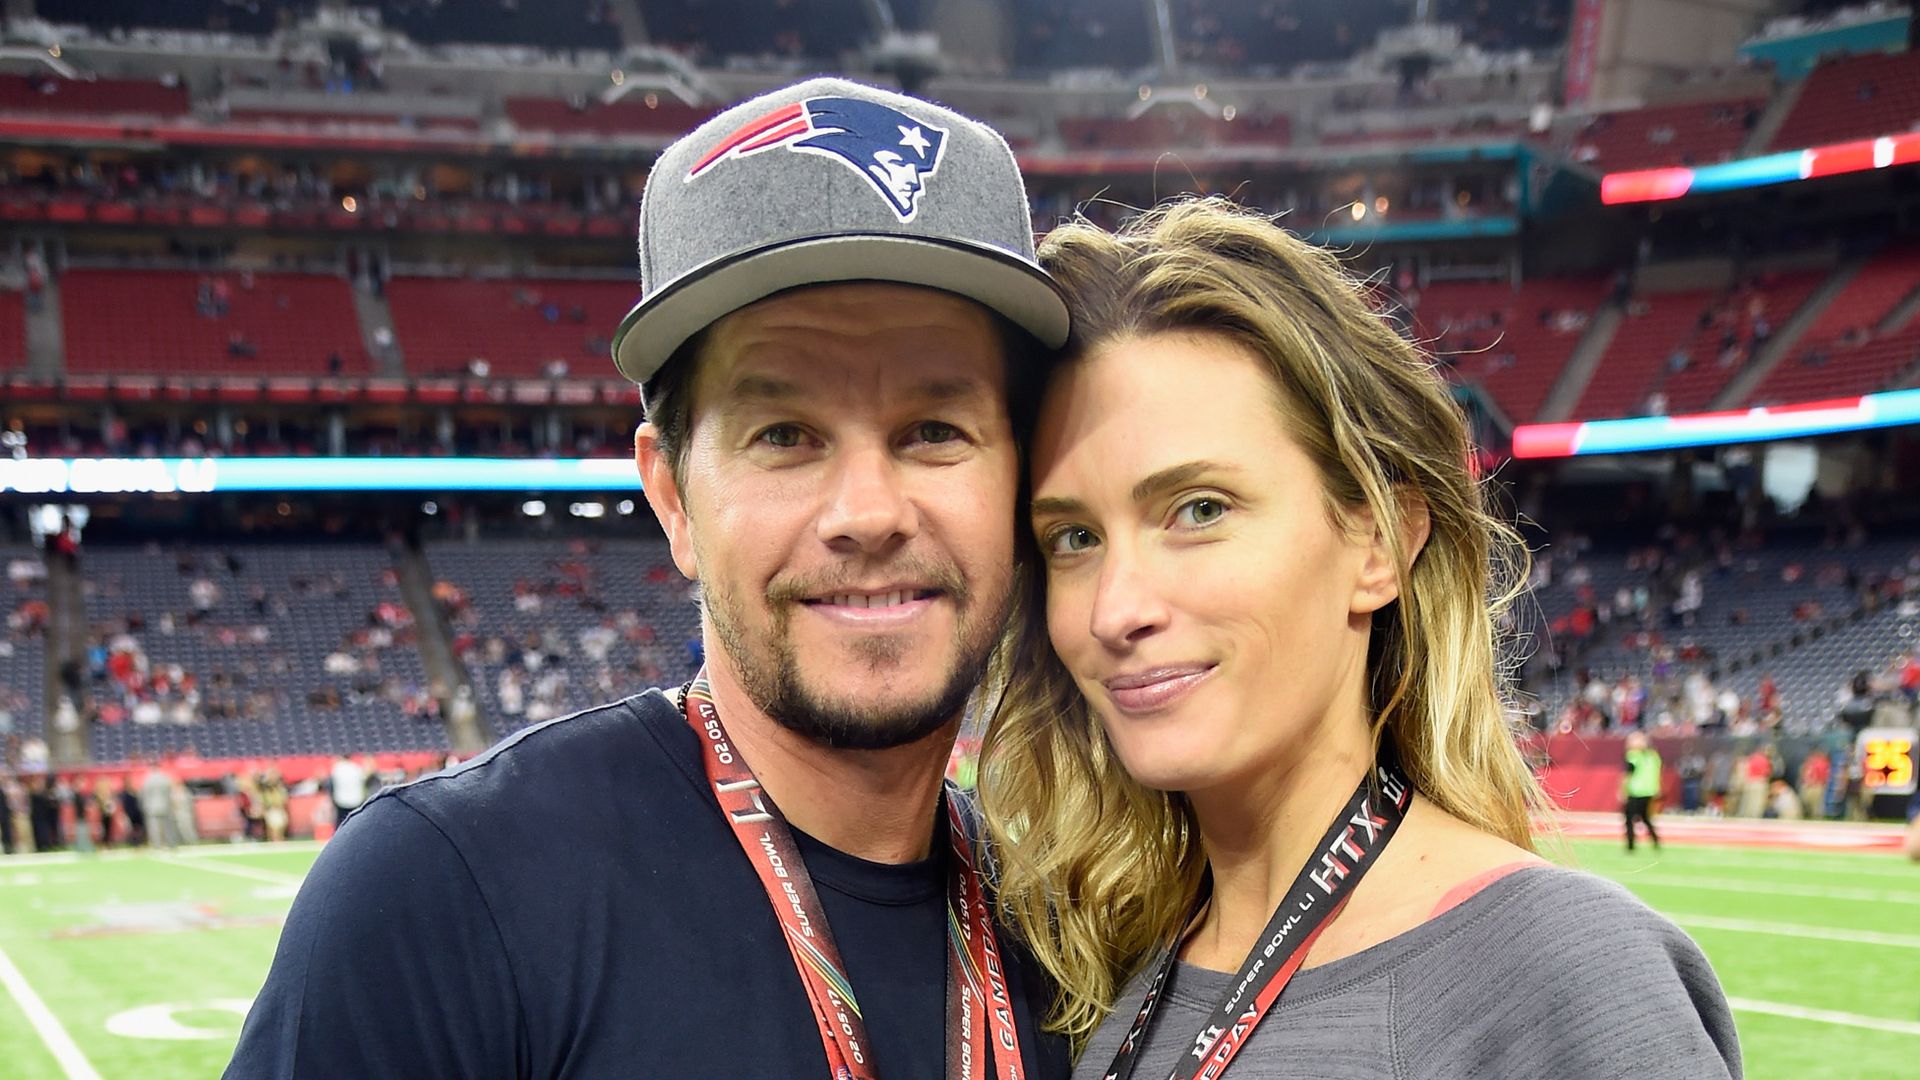 Actor Mark Wahlberg and Rhea Durham attend Super Bowl LI at NRG Stadium on February 5, 2017 in Houston, Texas.